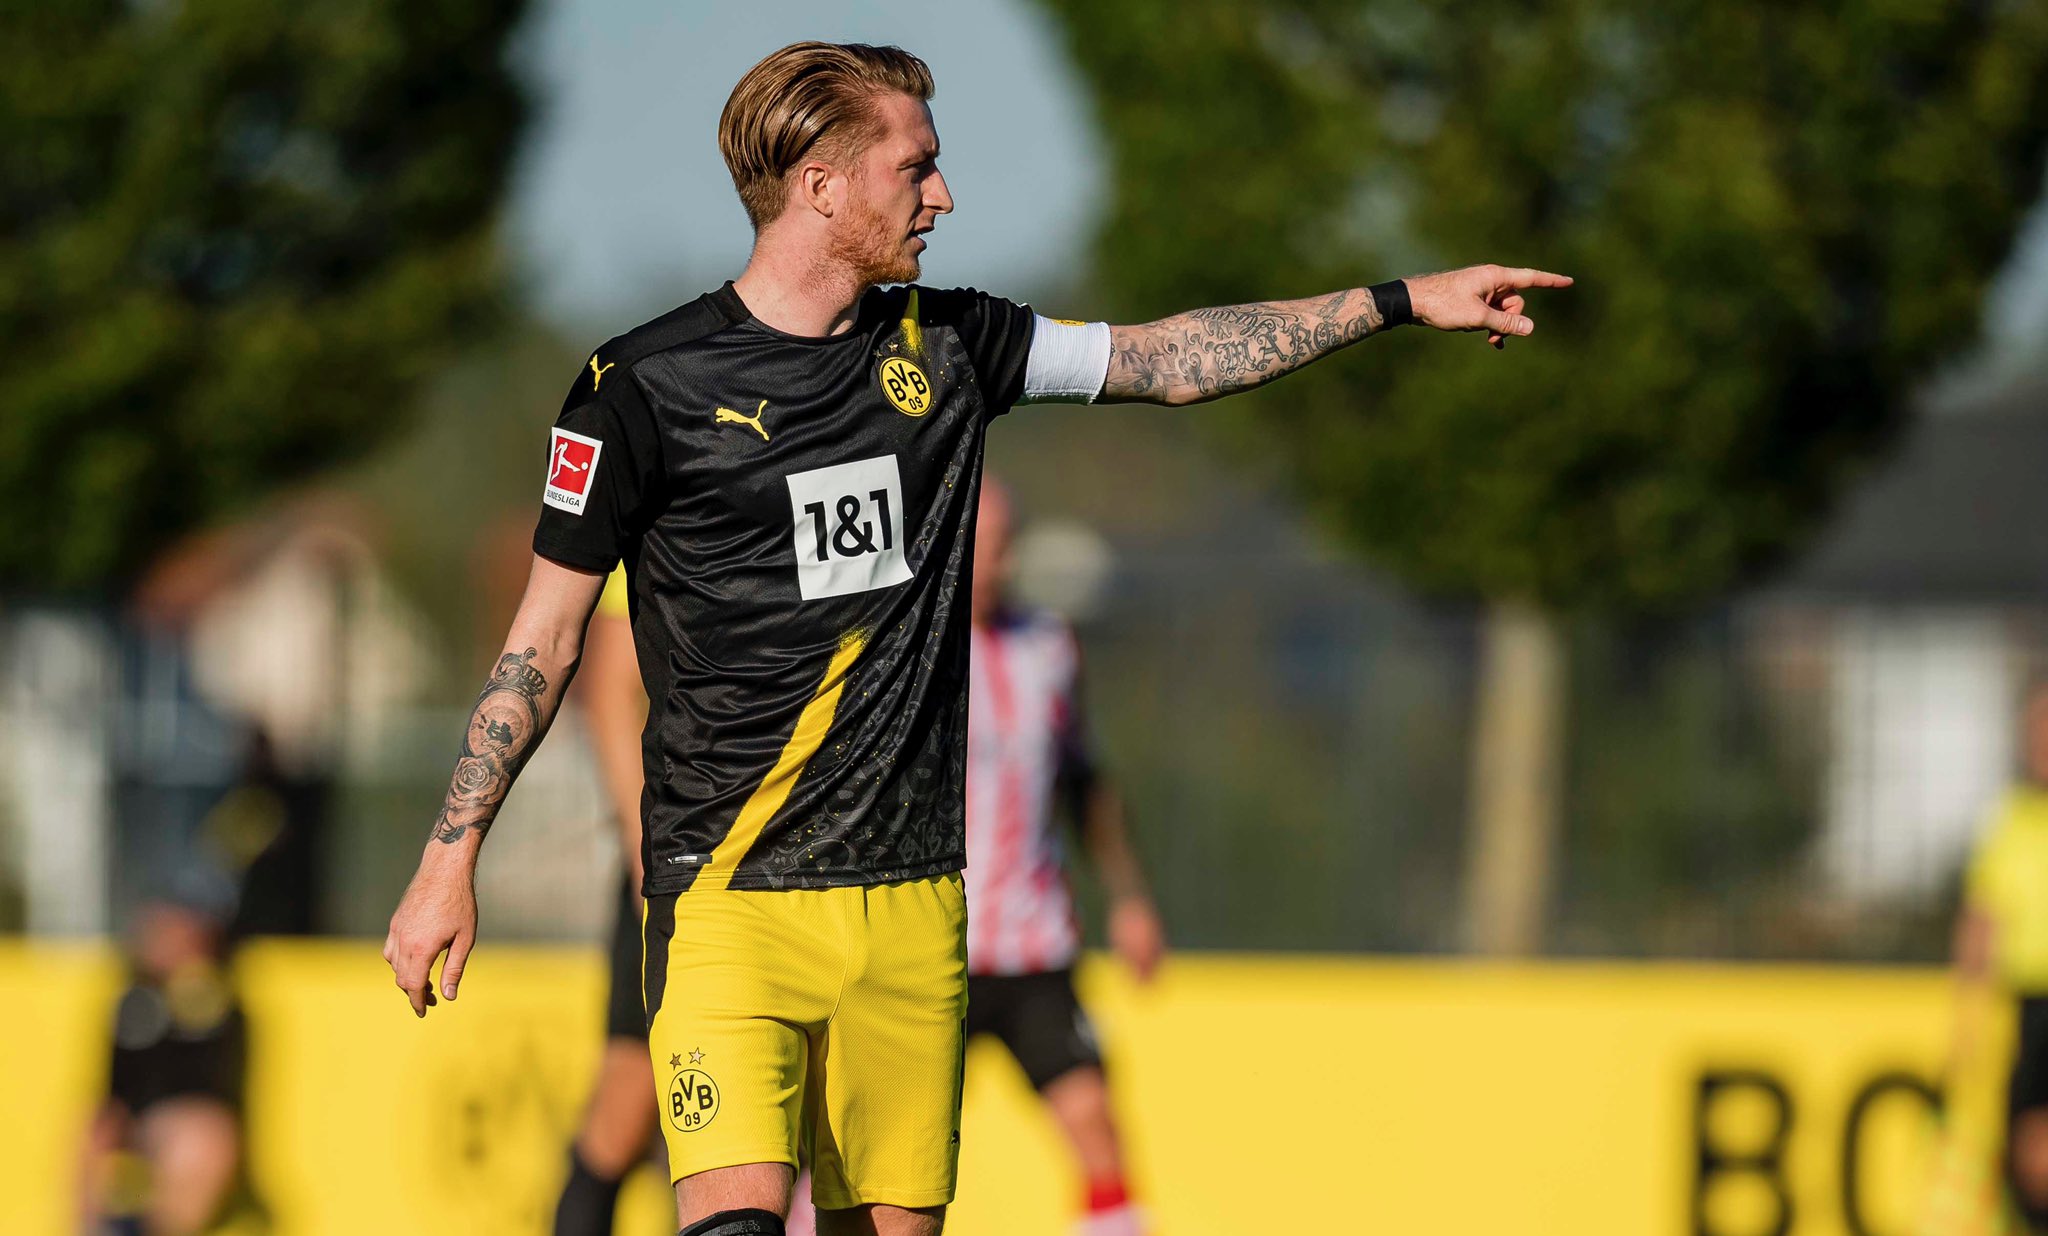 We have squad to become German champions and win DFB Pokal, claims Marco Reus